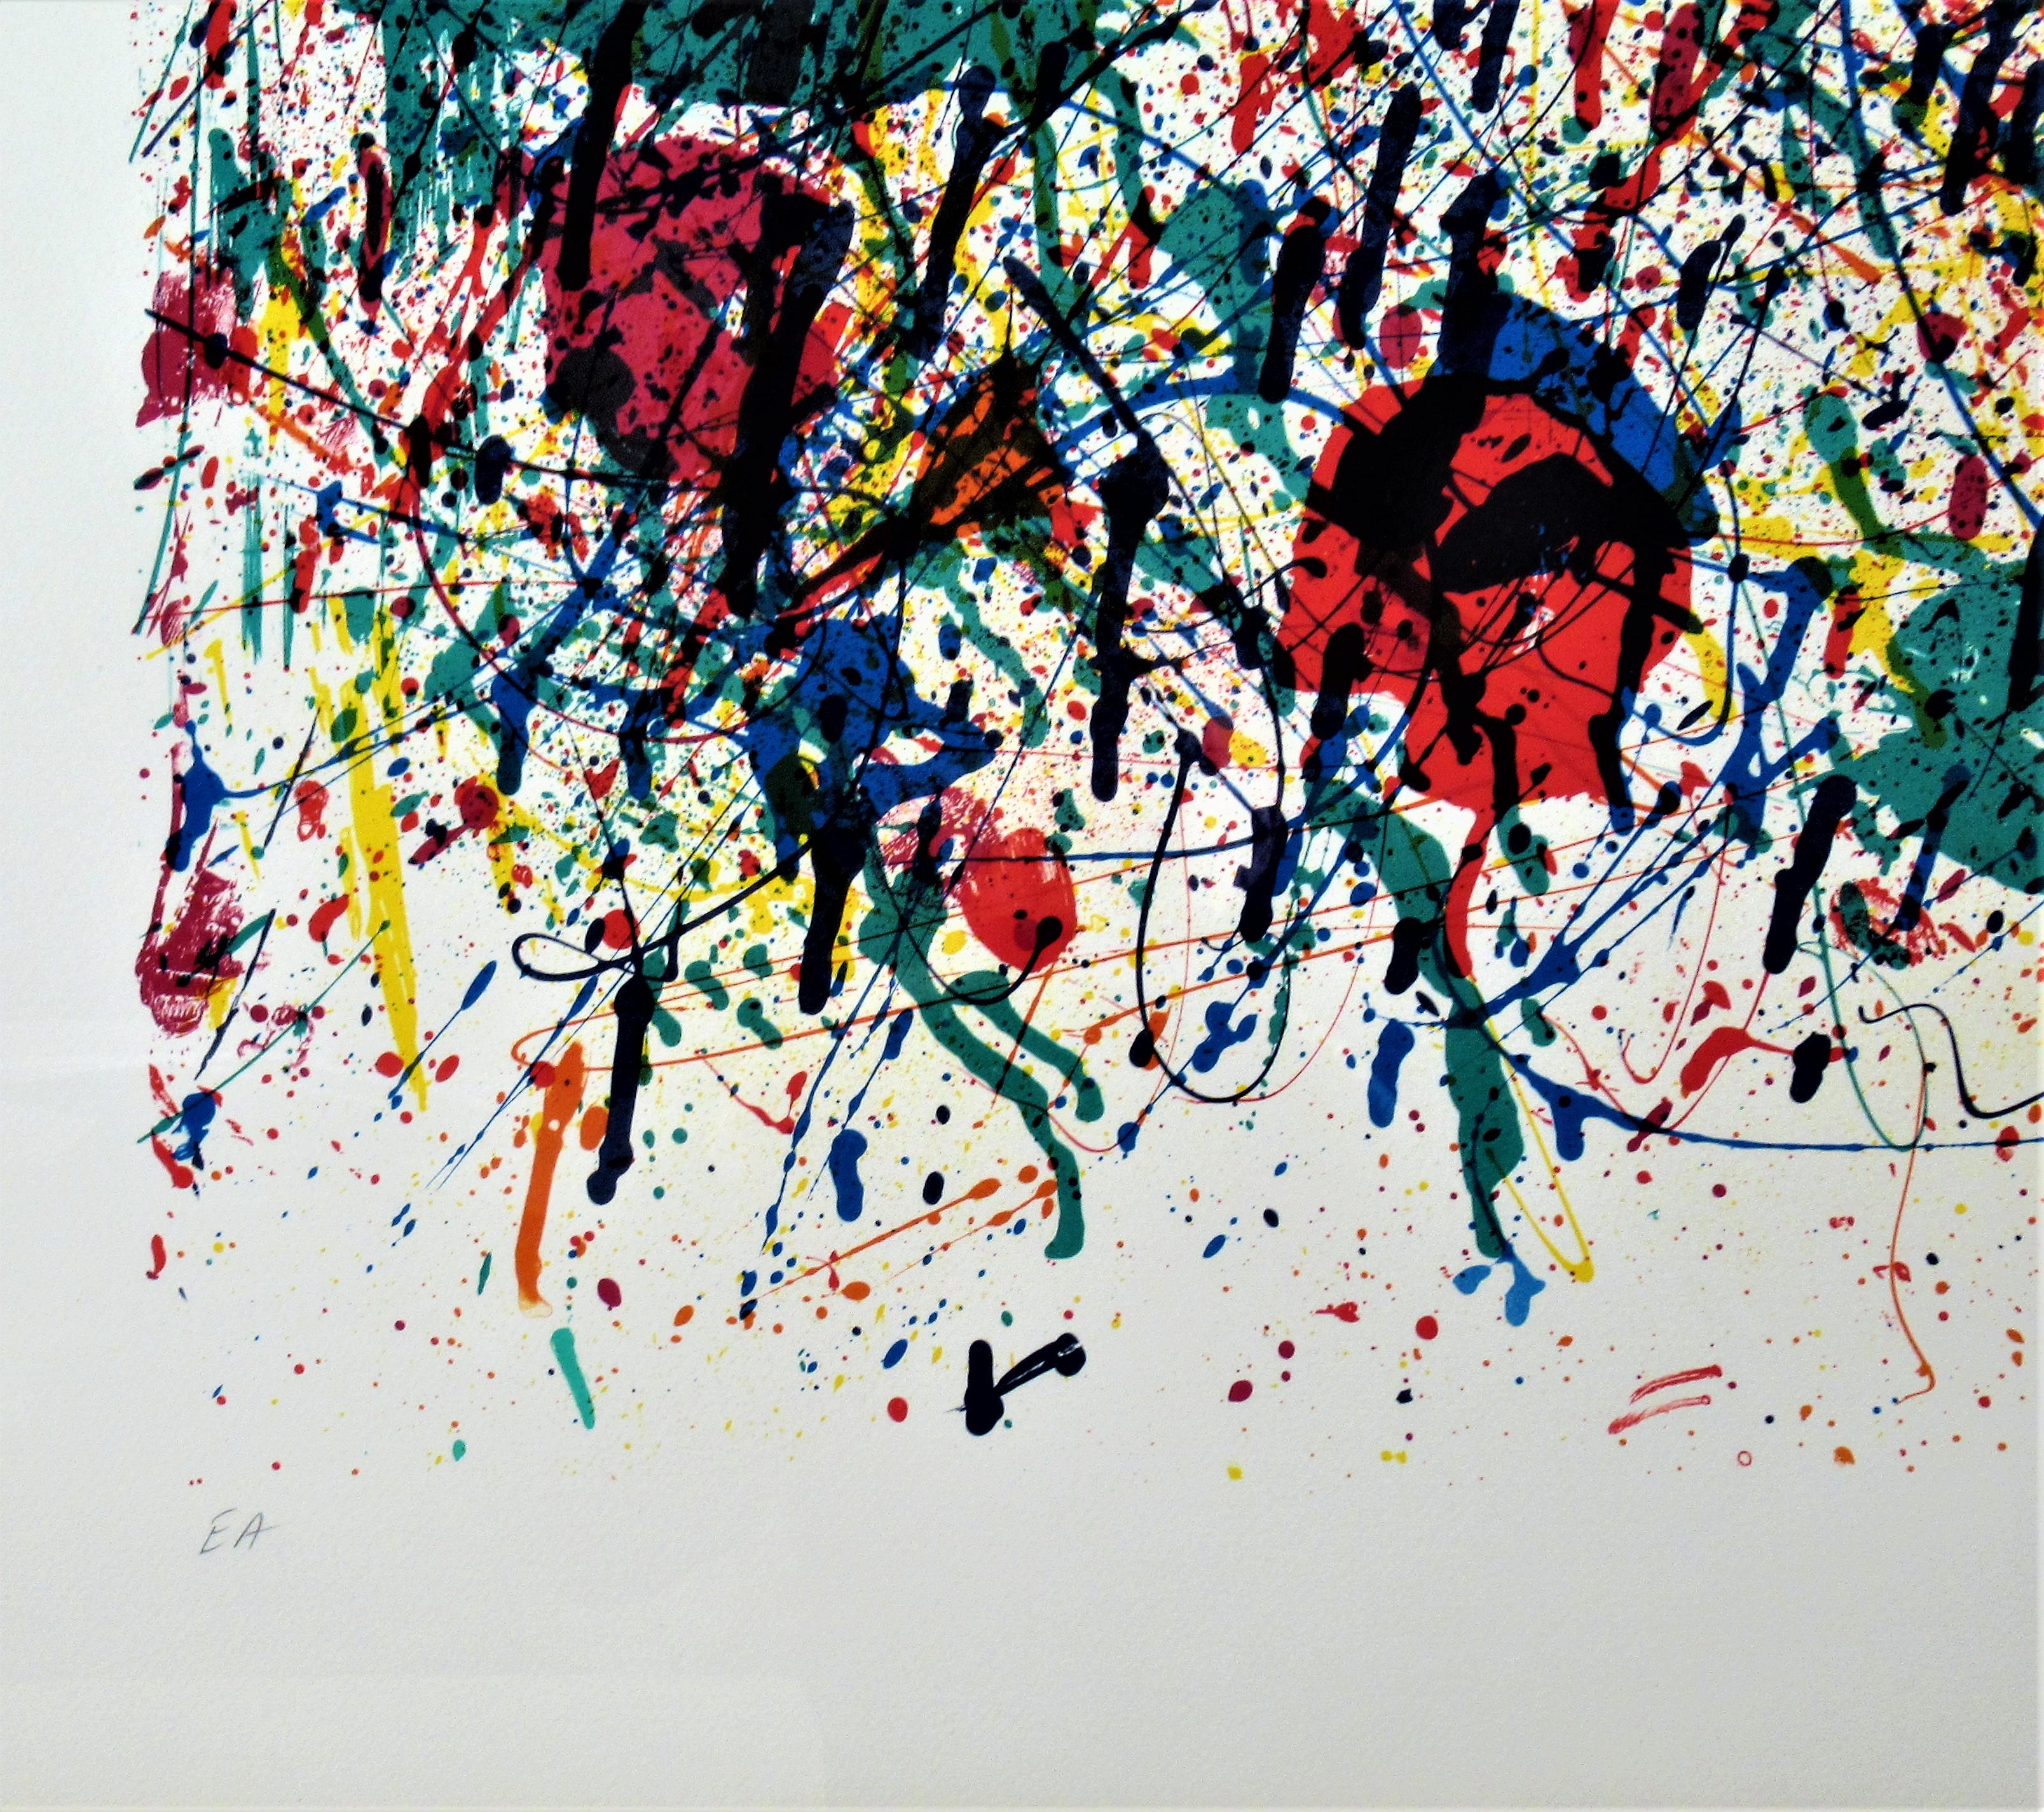 Untitled - Abstract Expressionist Print by Sam Francis